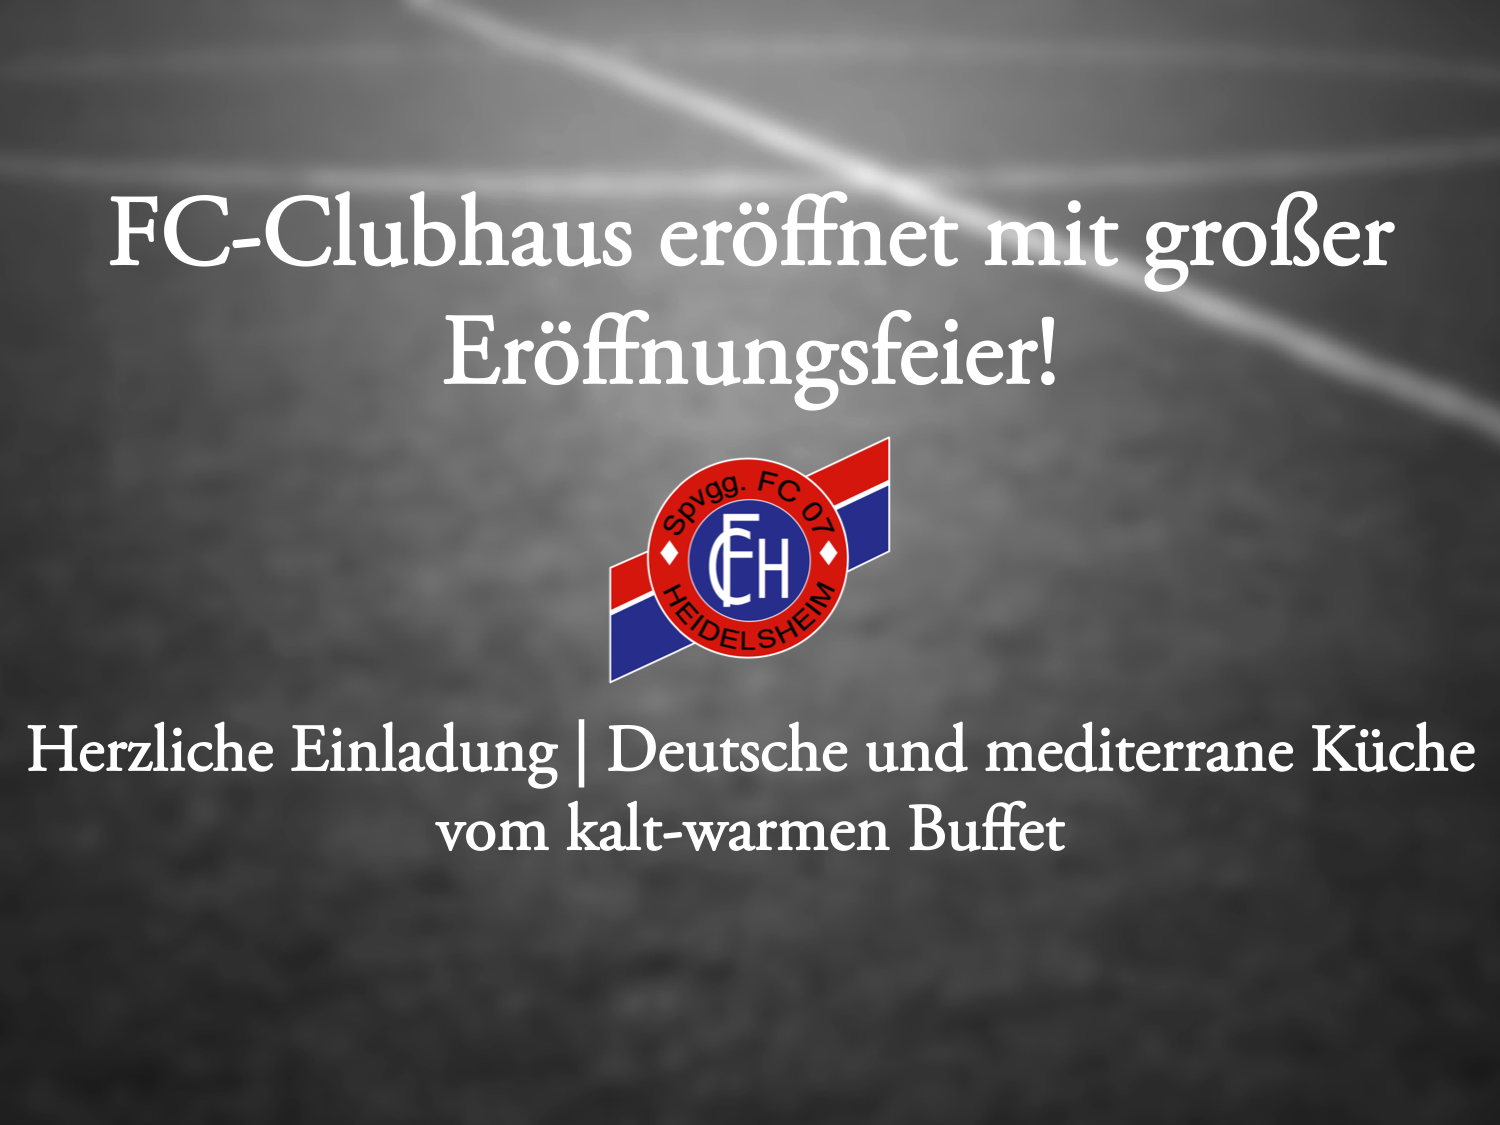 You are currently viewing Große Eröffnungsfeier im FC-Clubhaus!